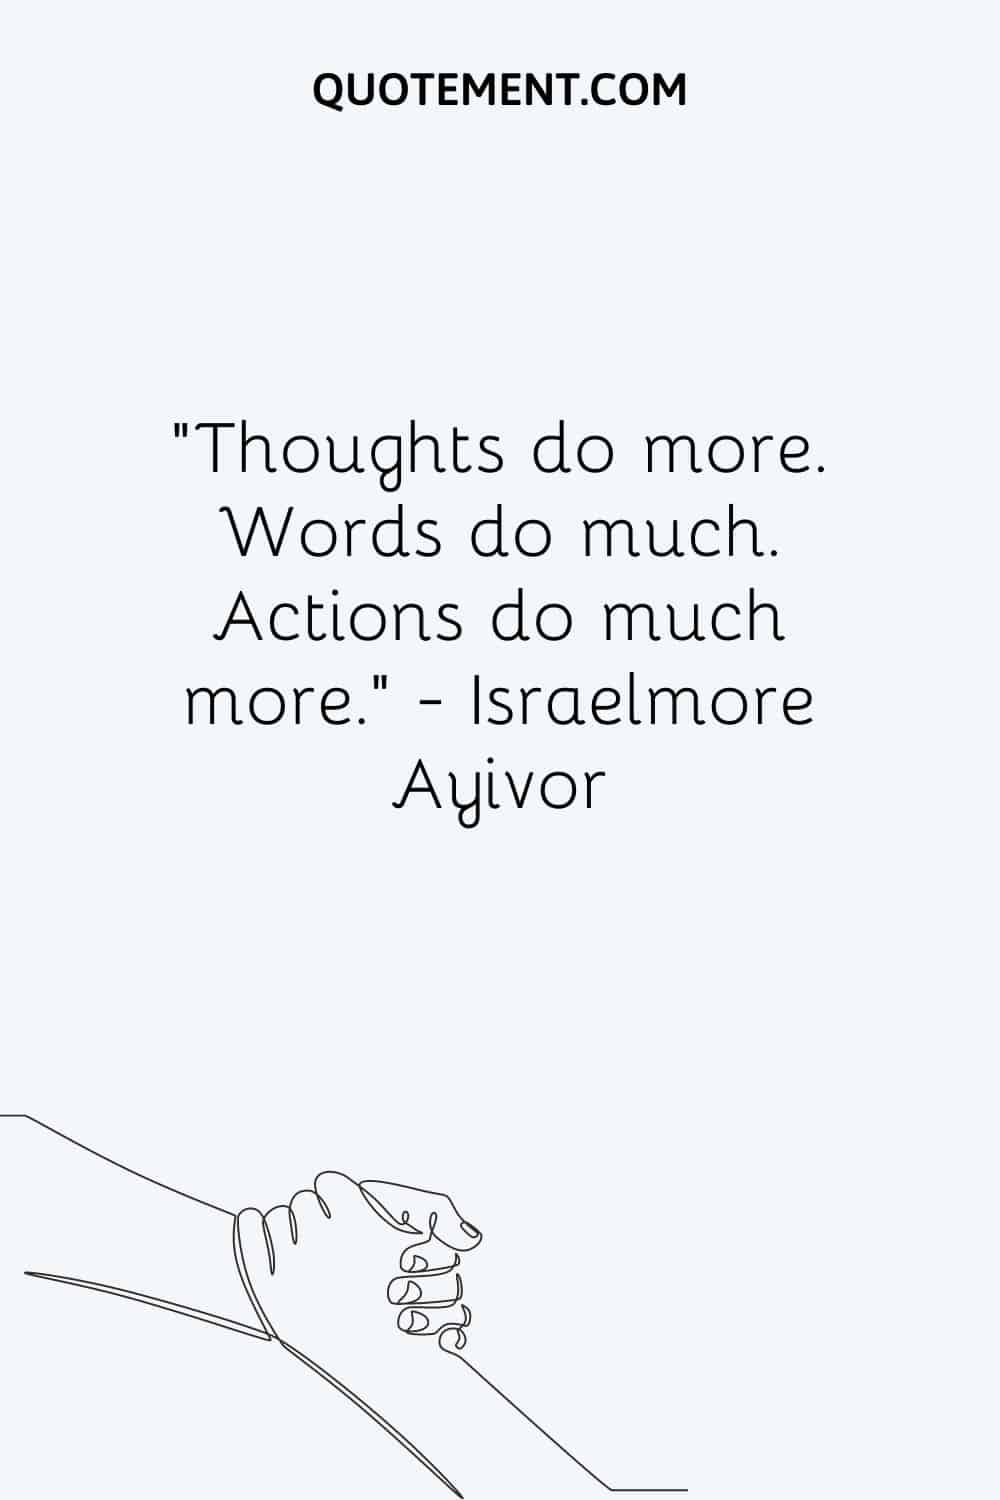 Thoughts do more. Words do much. Actions do much more